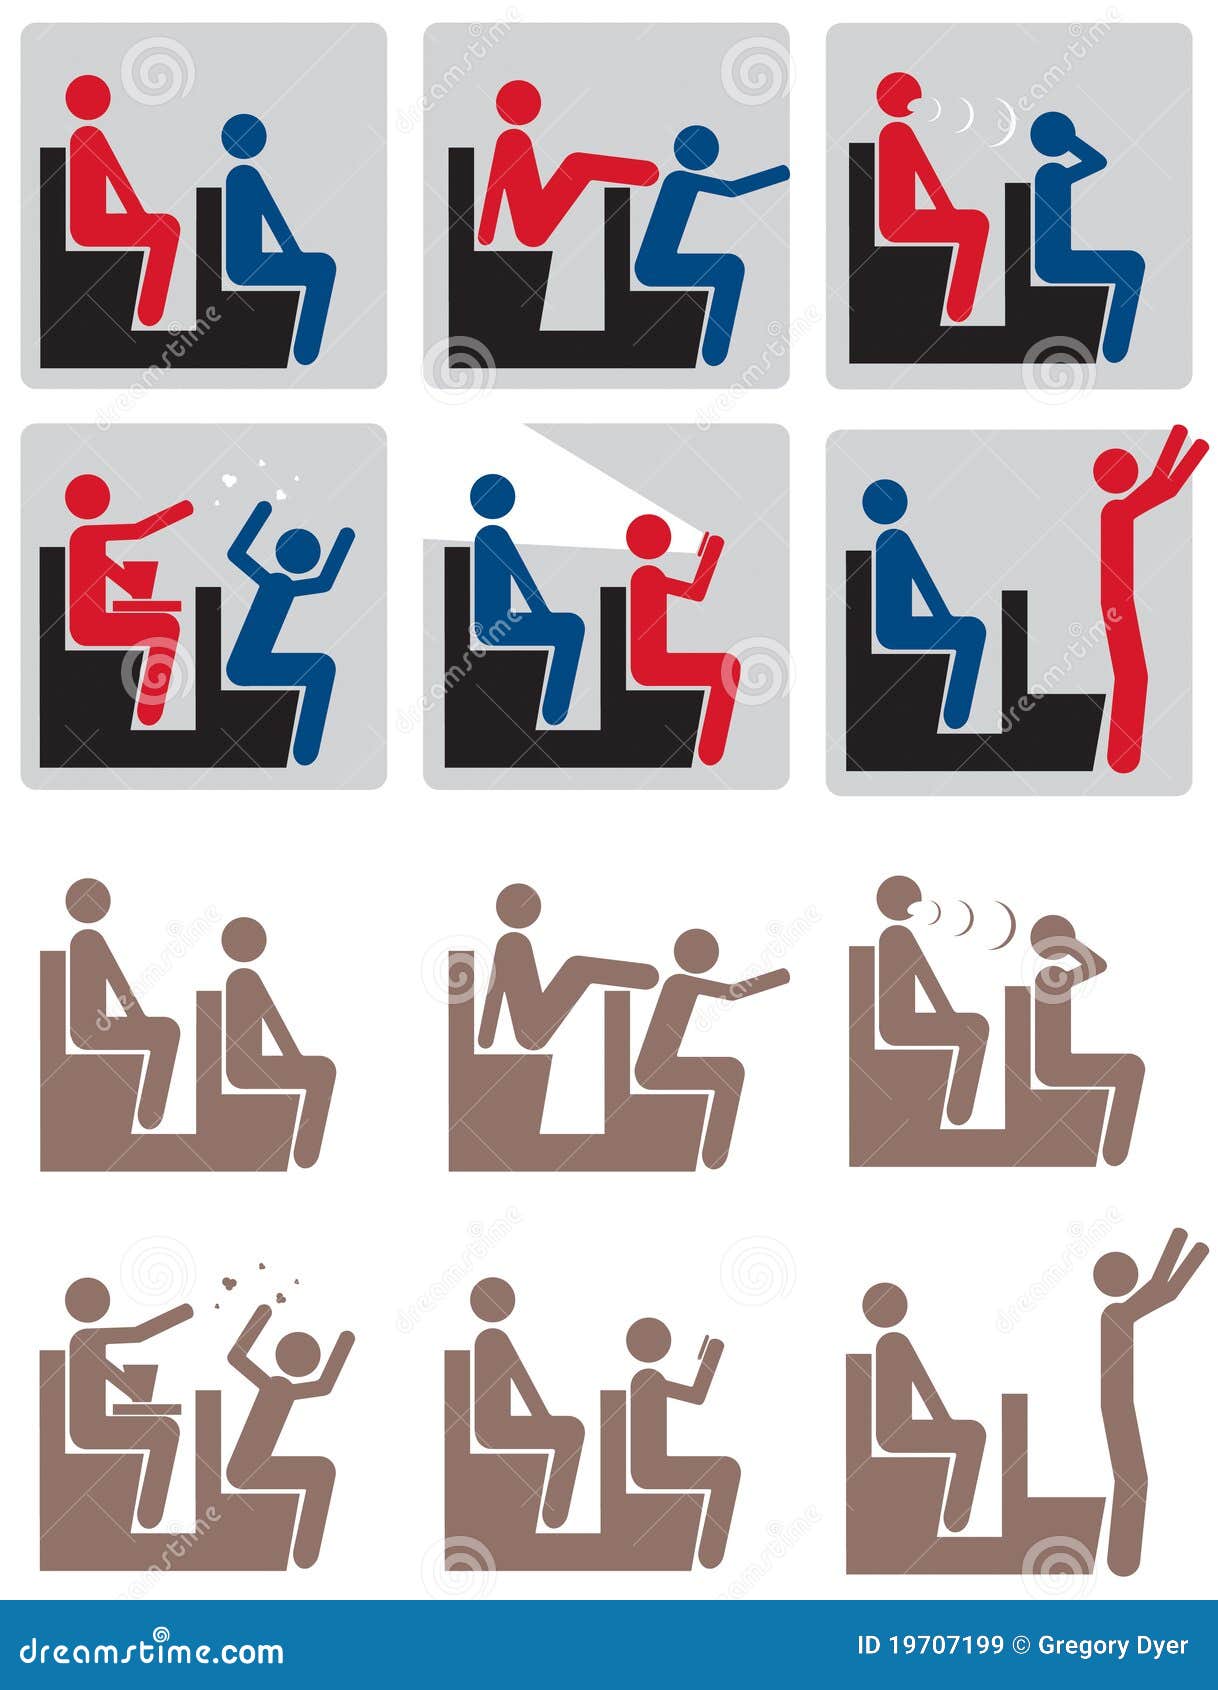 Movie Theater Rules Icon Set Royalty Free Stock Images - Image: 19707199